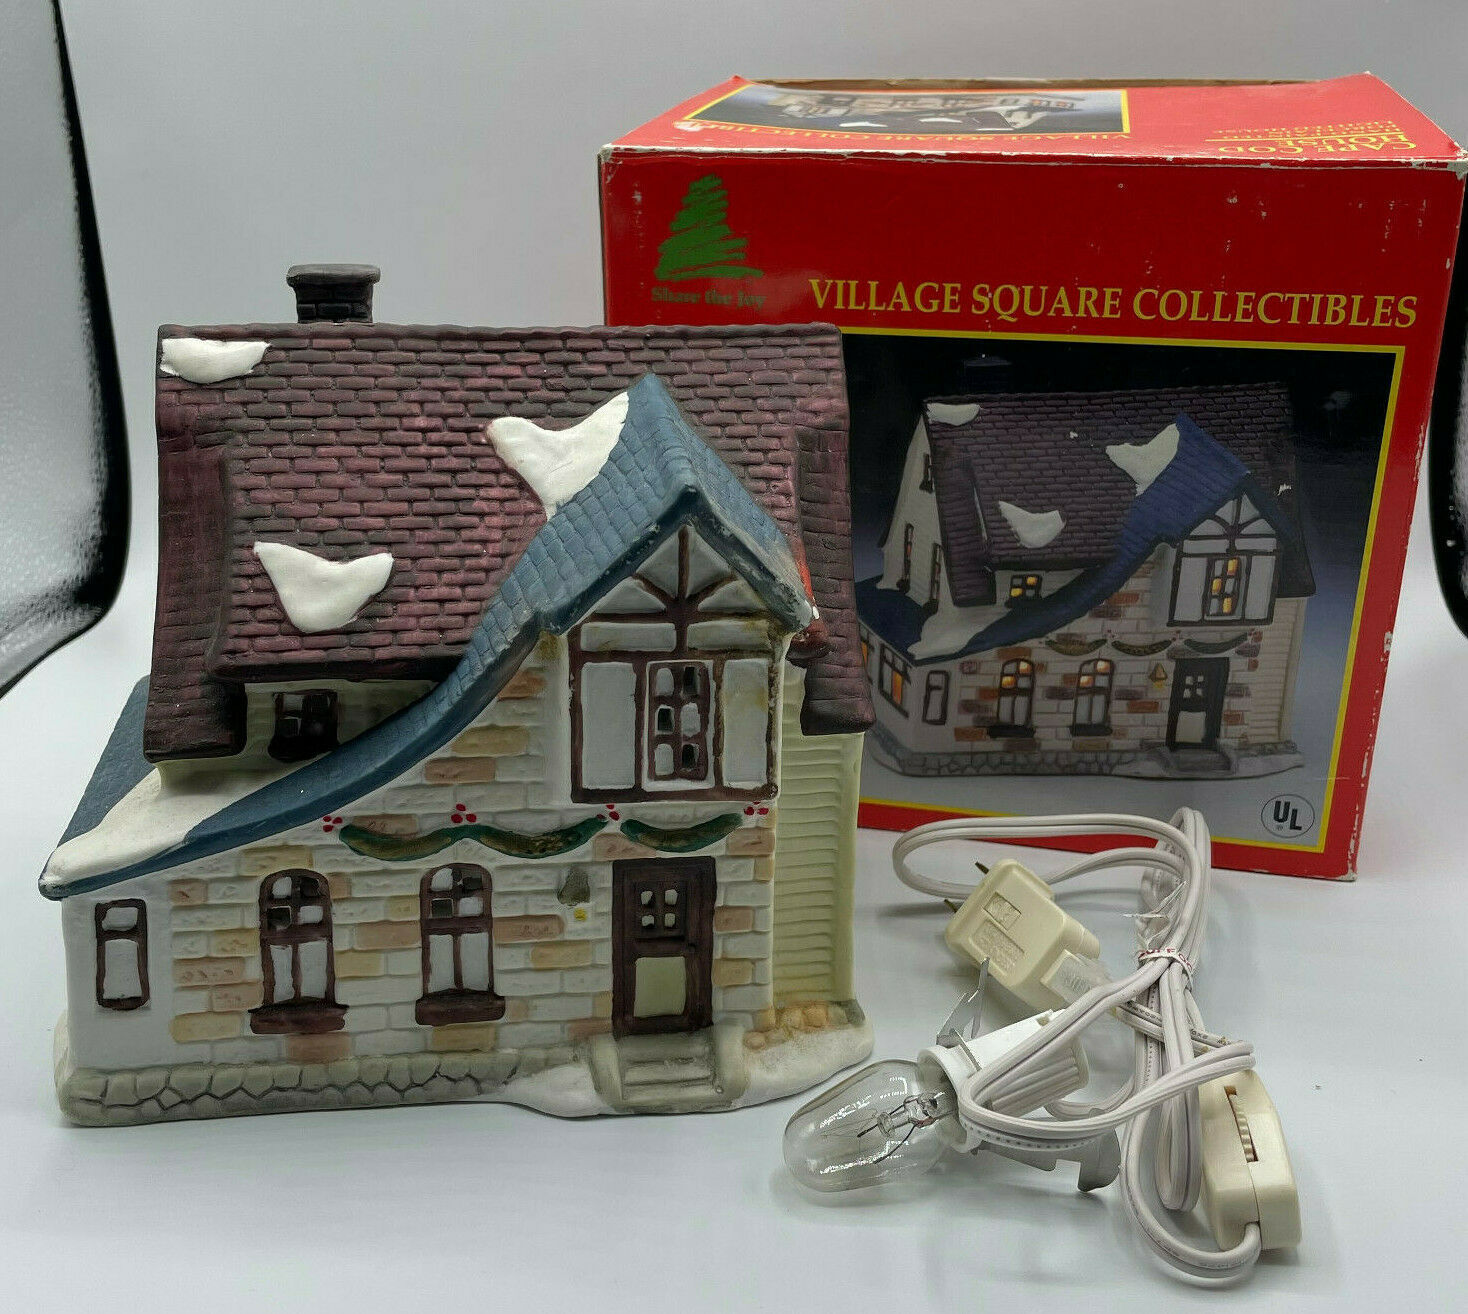 Caldor Village Square Collectibles Cape Cod House Hand-Painted Lighted Vintage